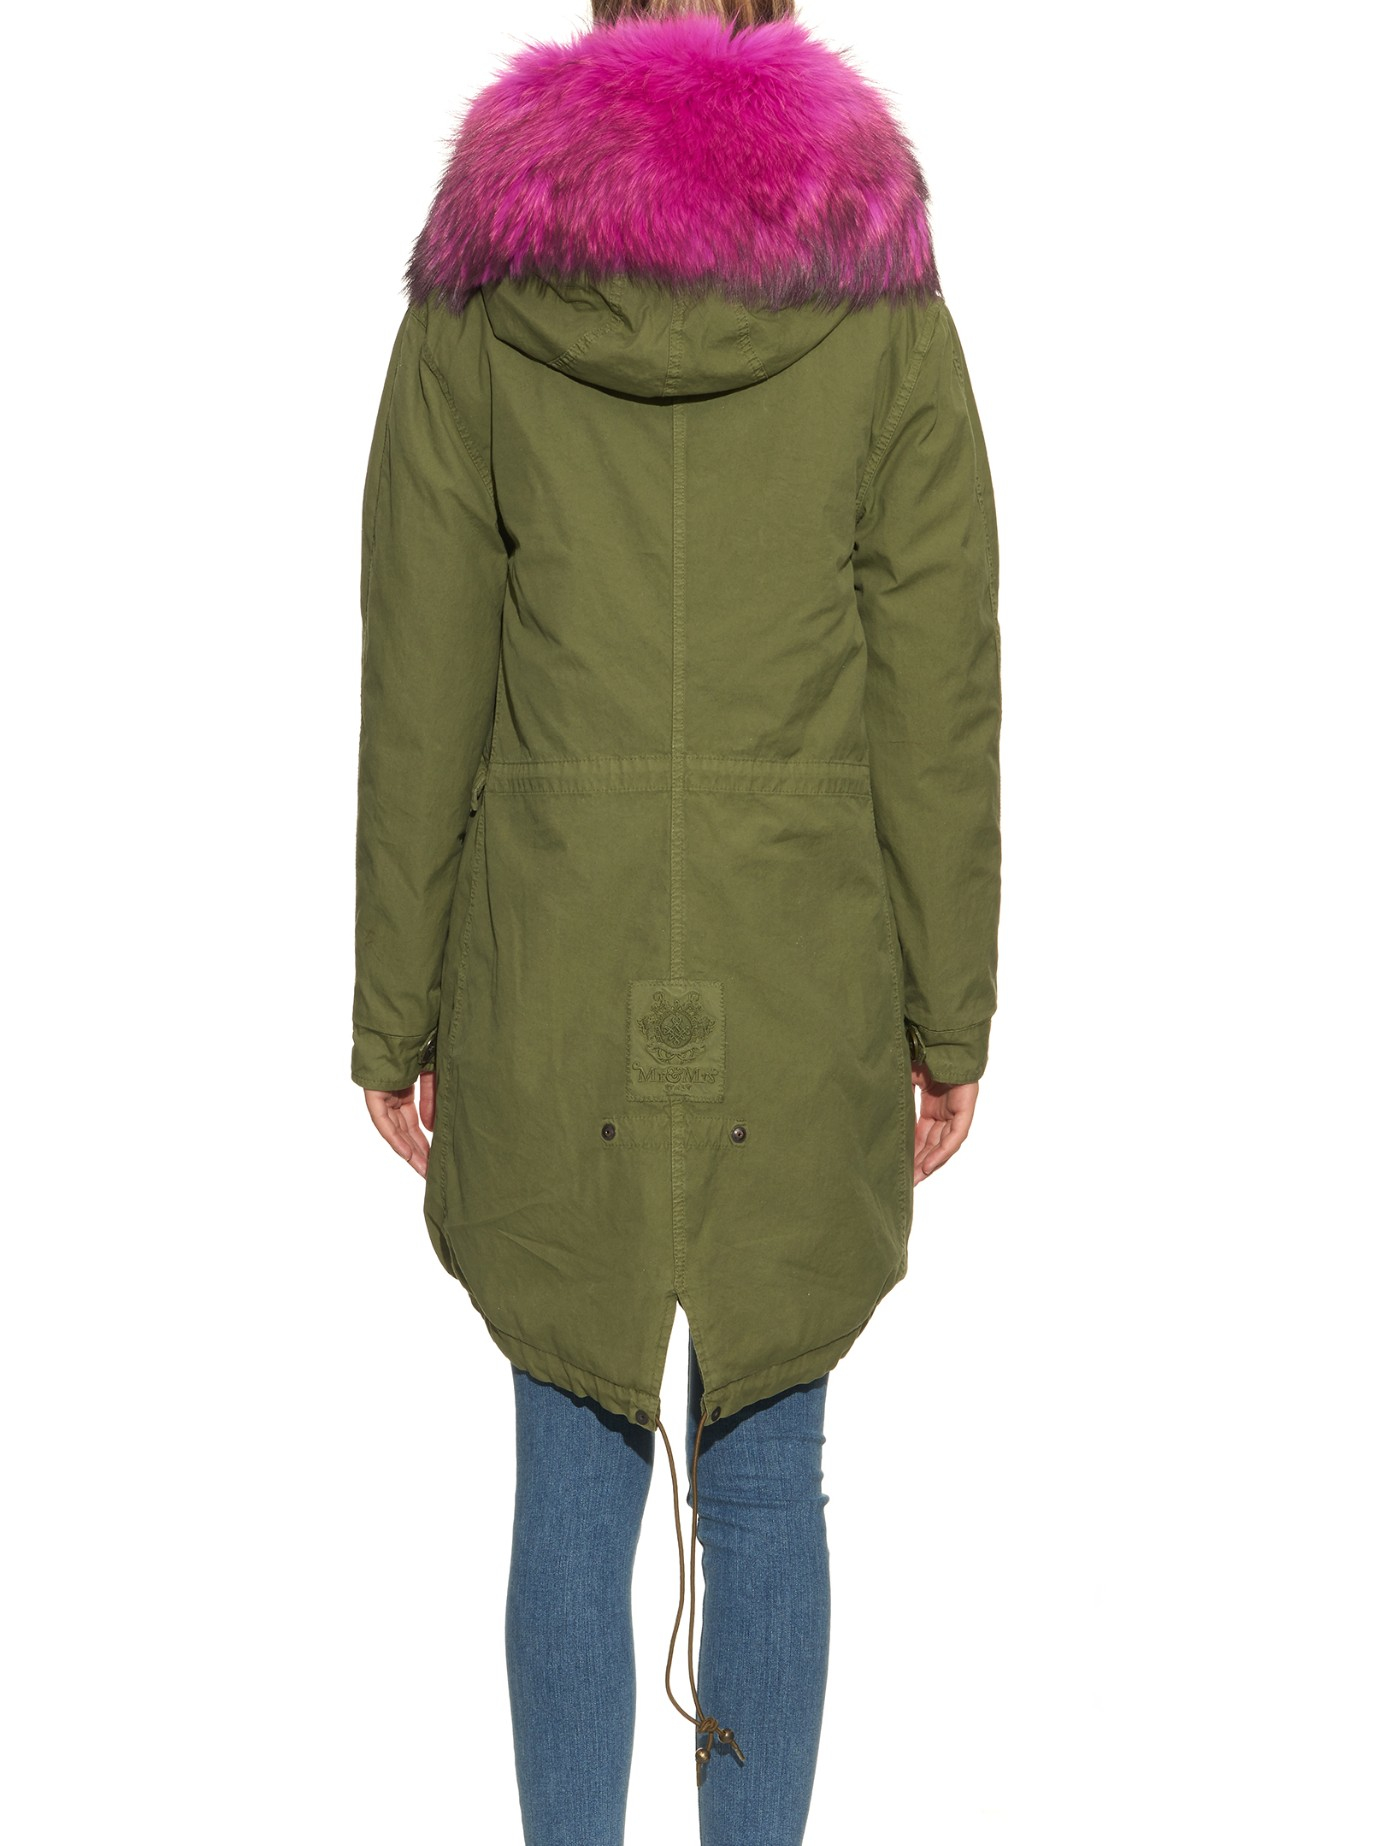 Mr & Mrs Italy Fur-Trim Cotton and Canvas-Blend Parka in Green | Lyst